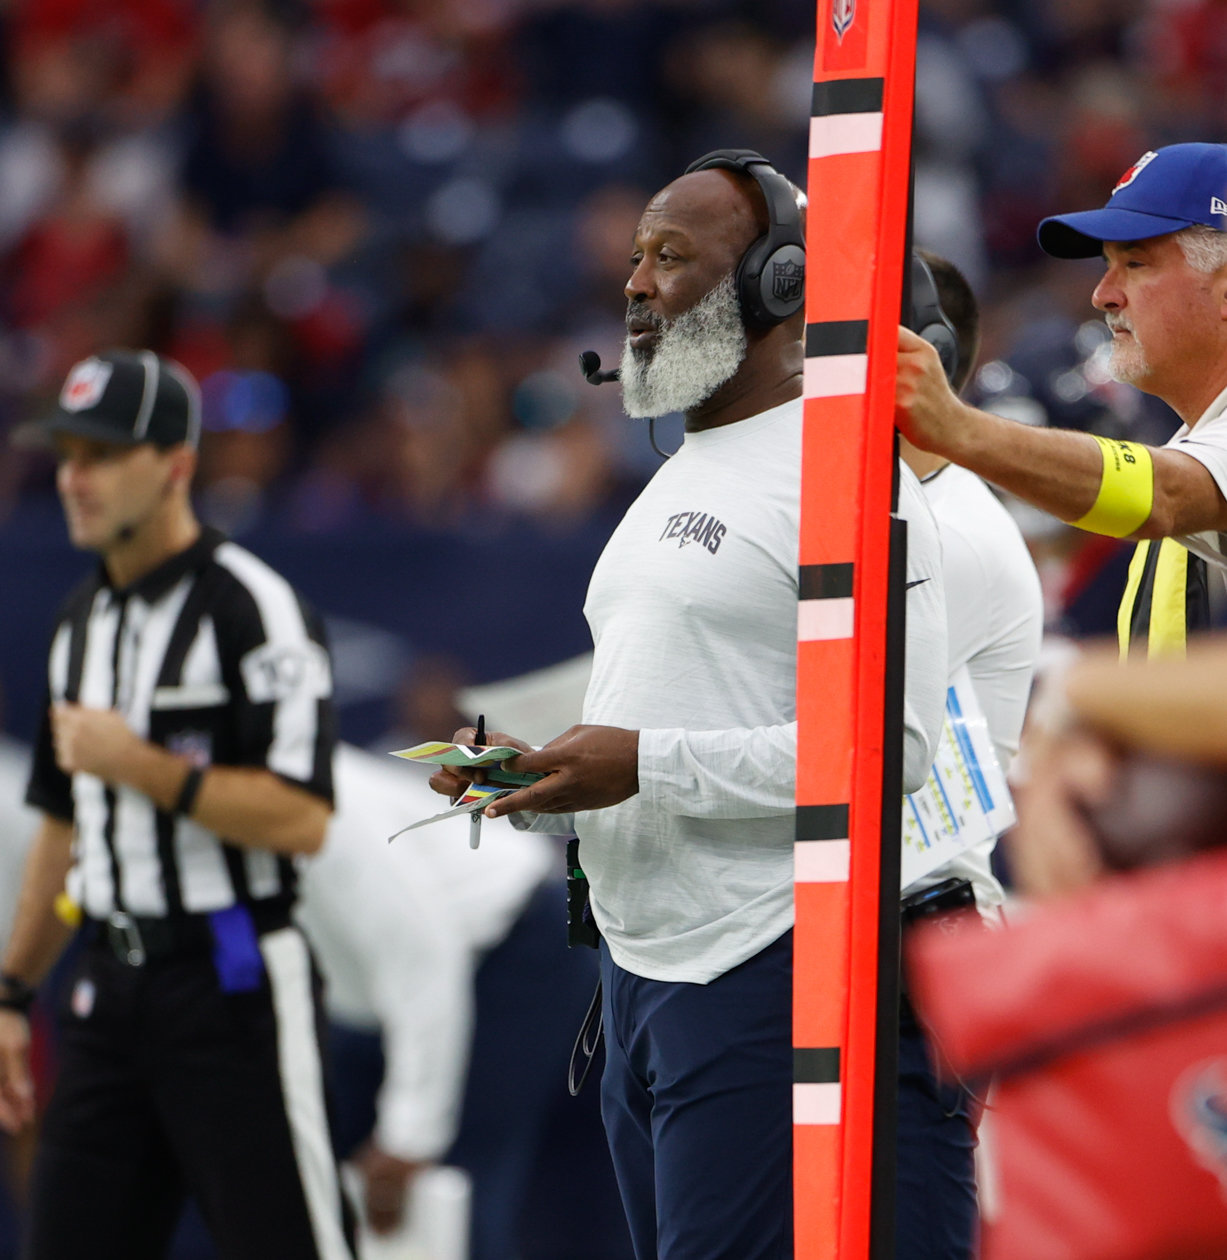 Texans head coach Lovie Smith during an NFL game between the Texans and the Titans on Oct. 30, 2022 in Houston.